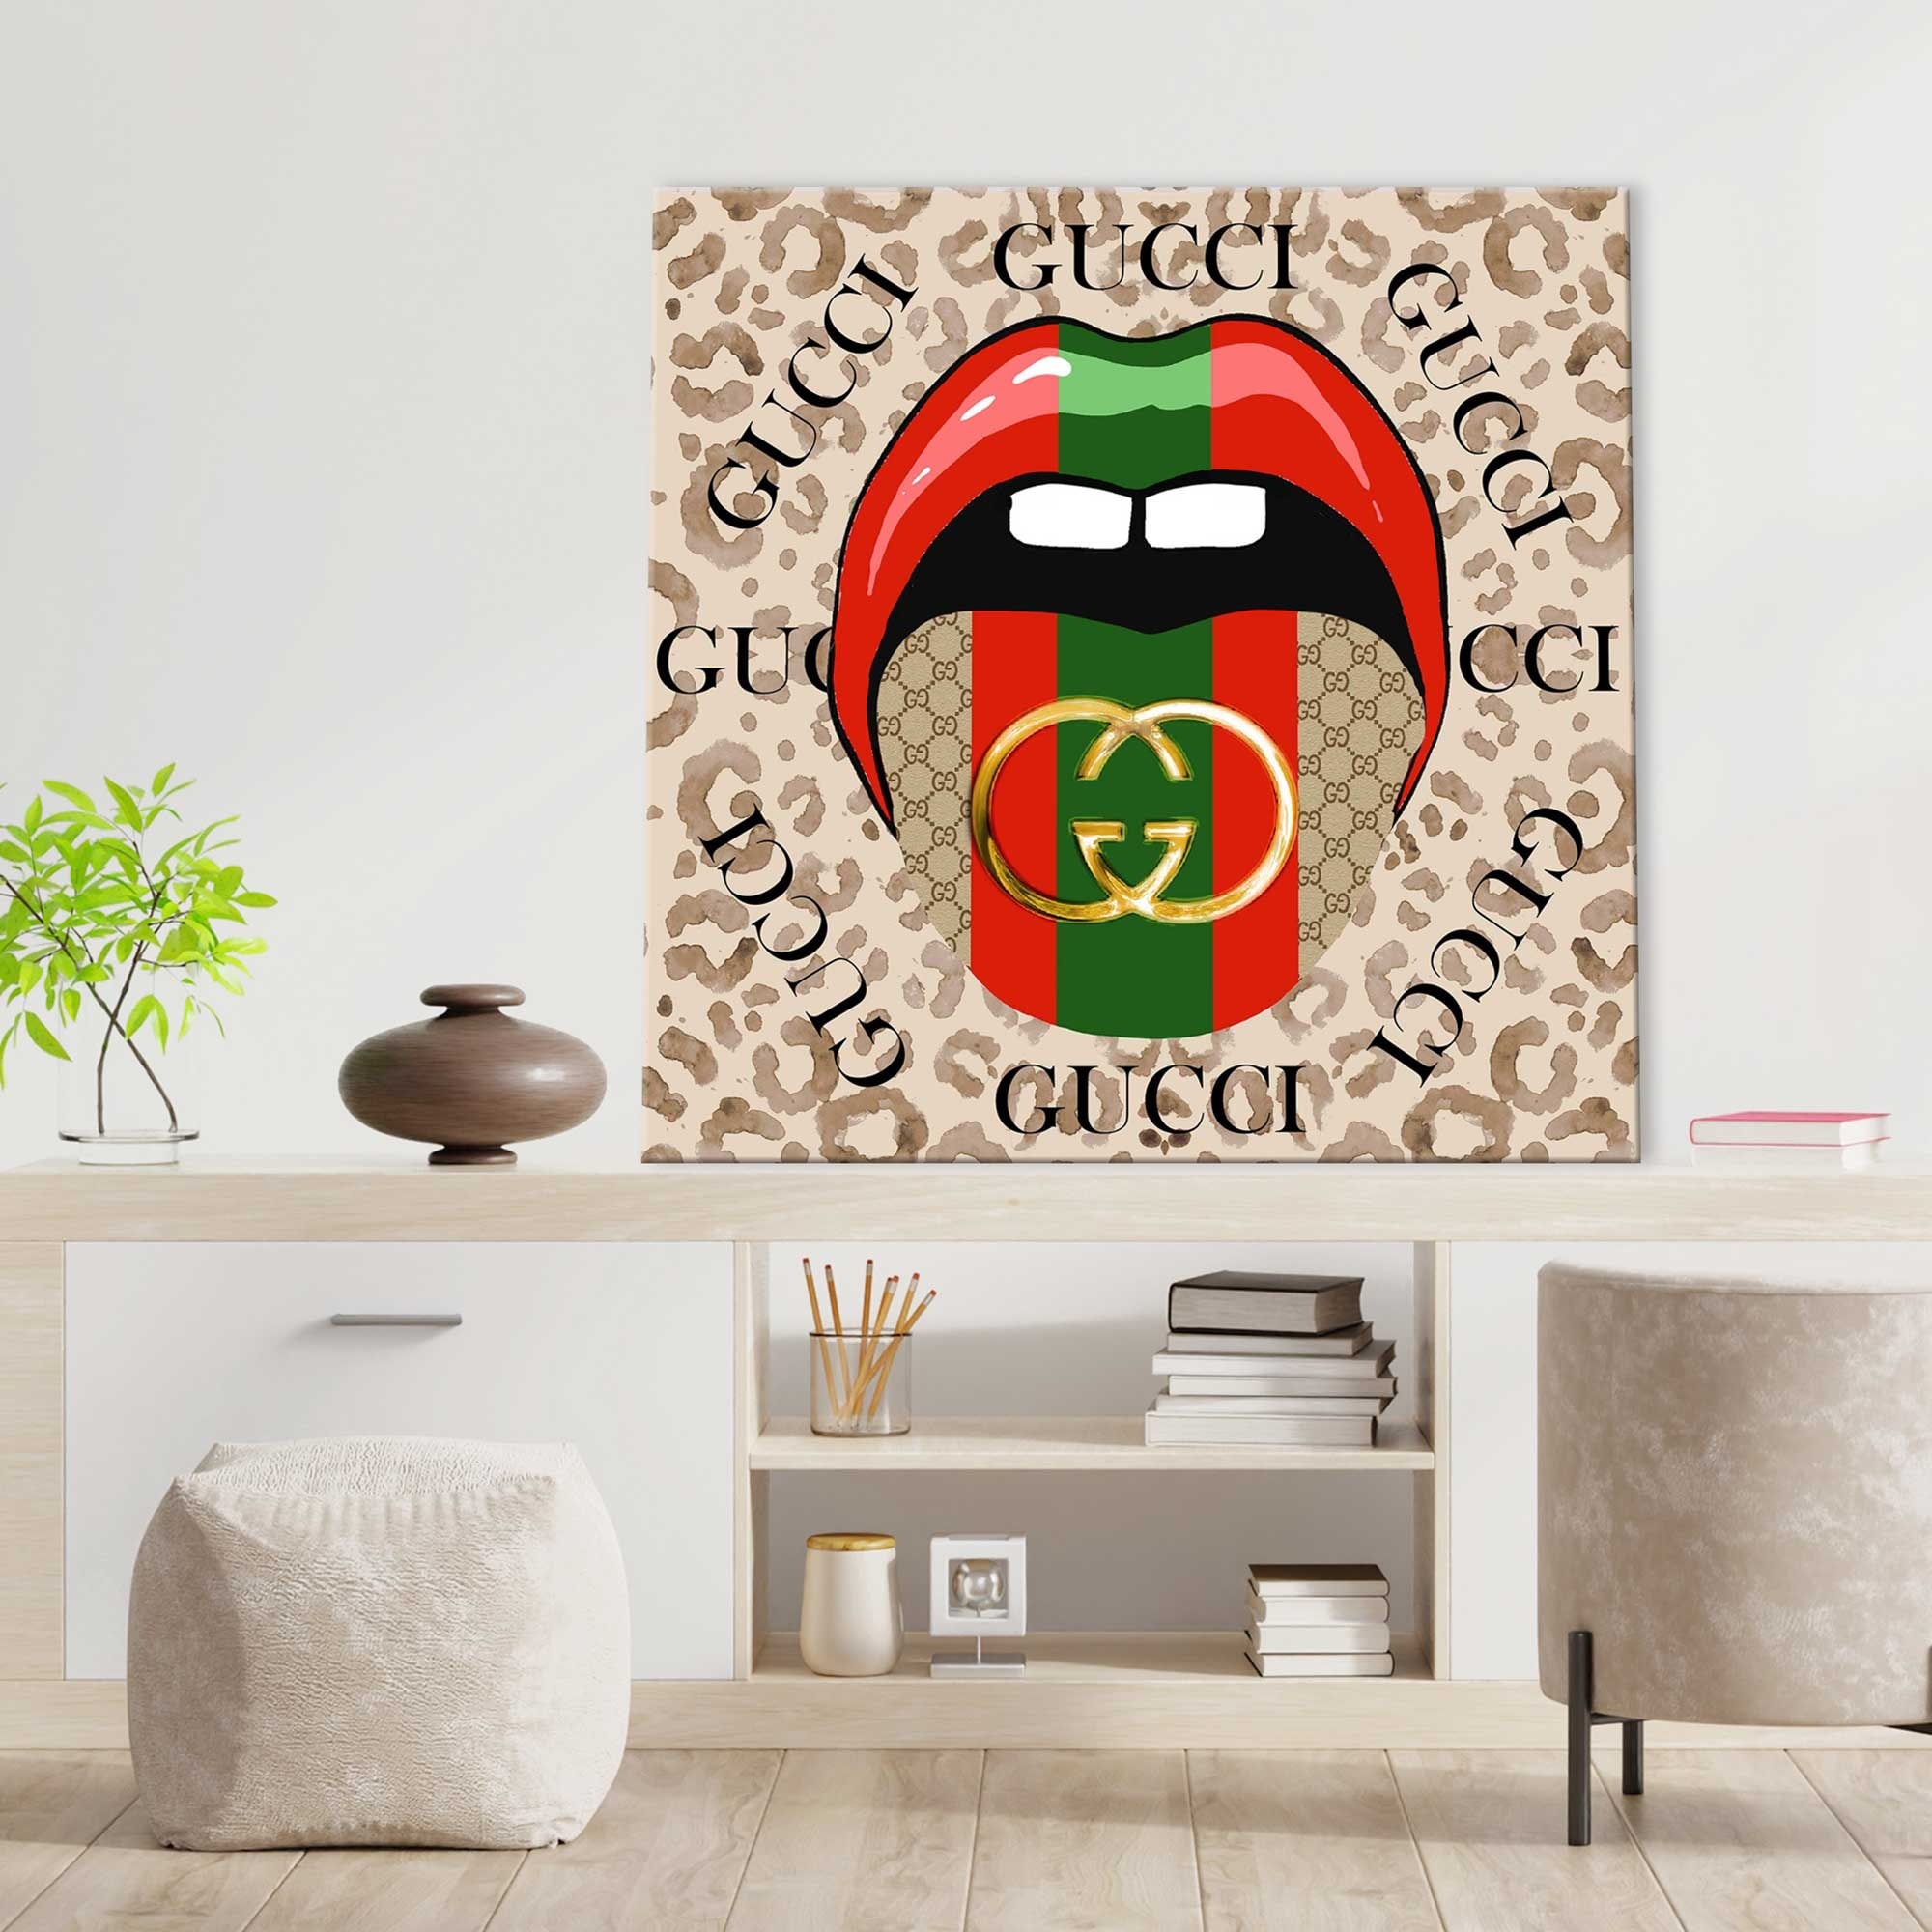 Gucci Tongue by Jodi Print on Canvas - On Sale - Bed Bath